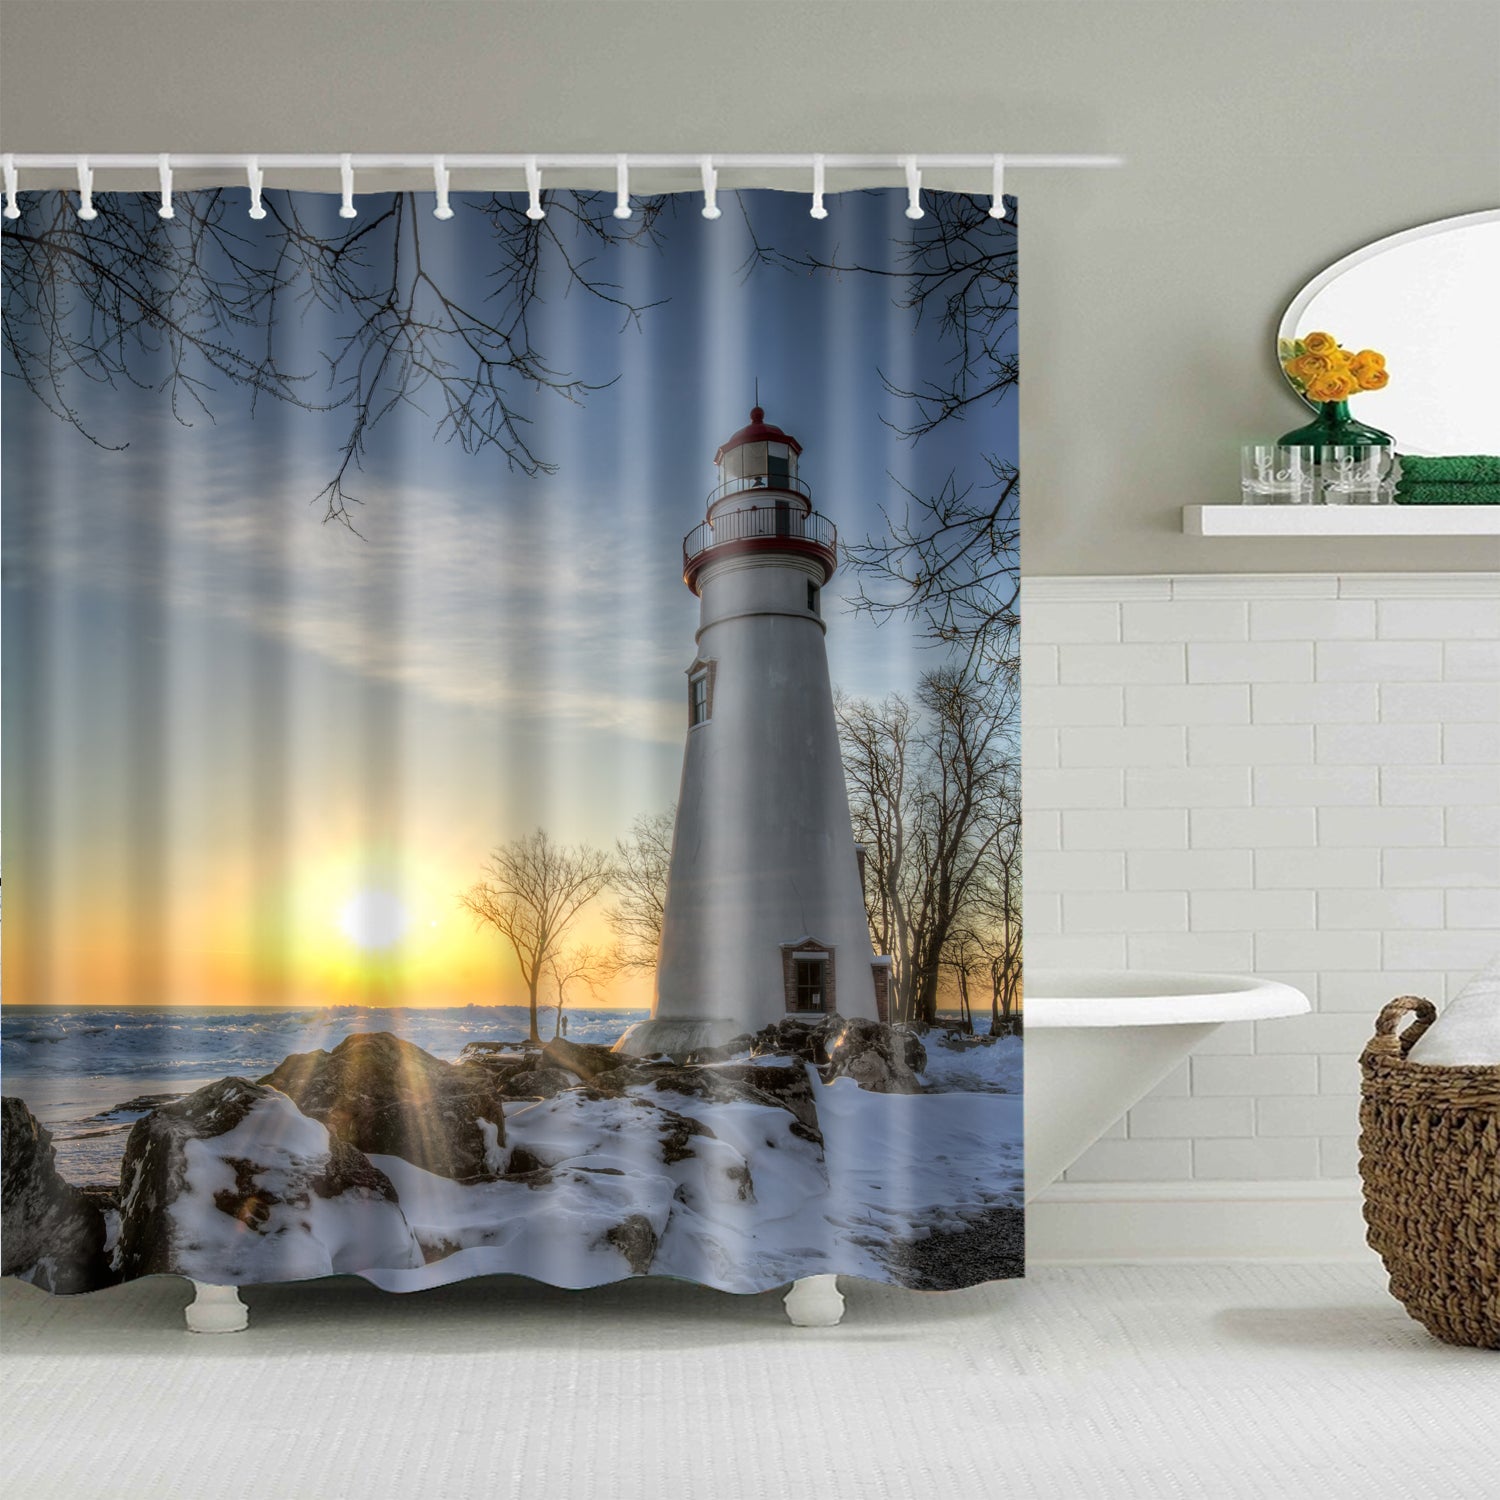 lighthouse shower curtain - Amazing Design Ideas For Your Small Living Room